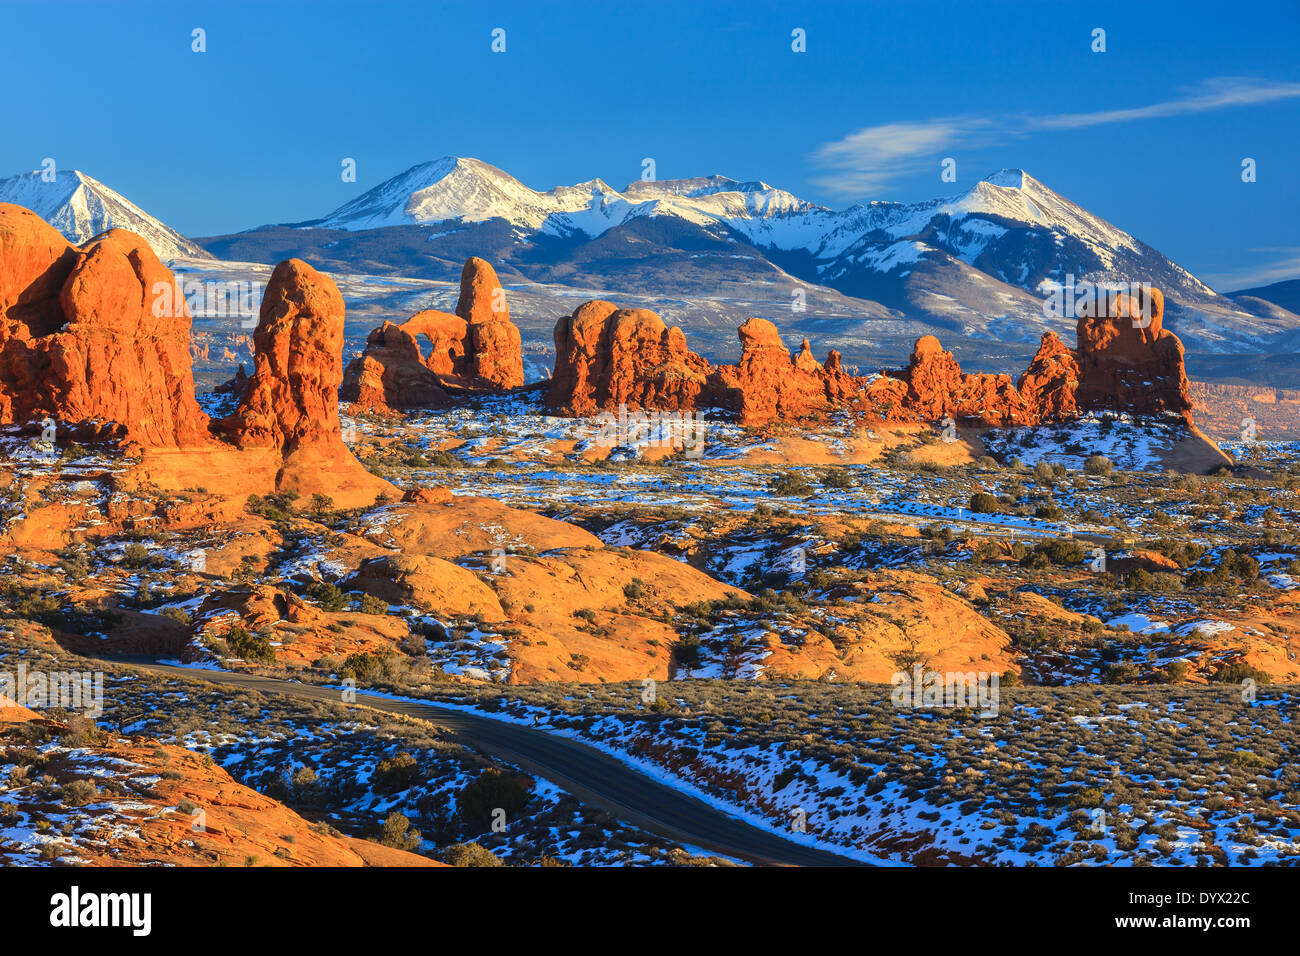 Winter scenery in Arches National Park, near Moab, Utah - USA Stock Photo